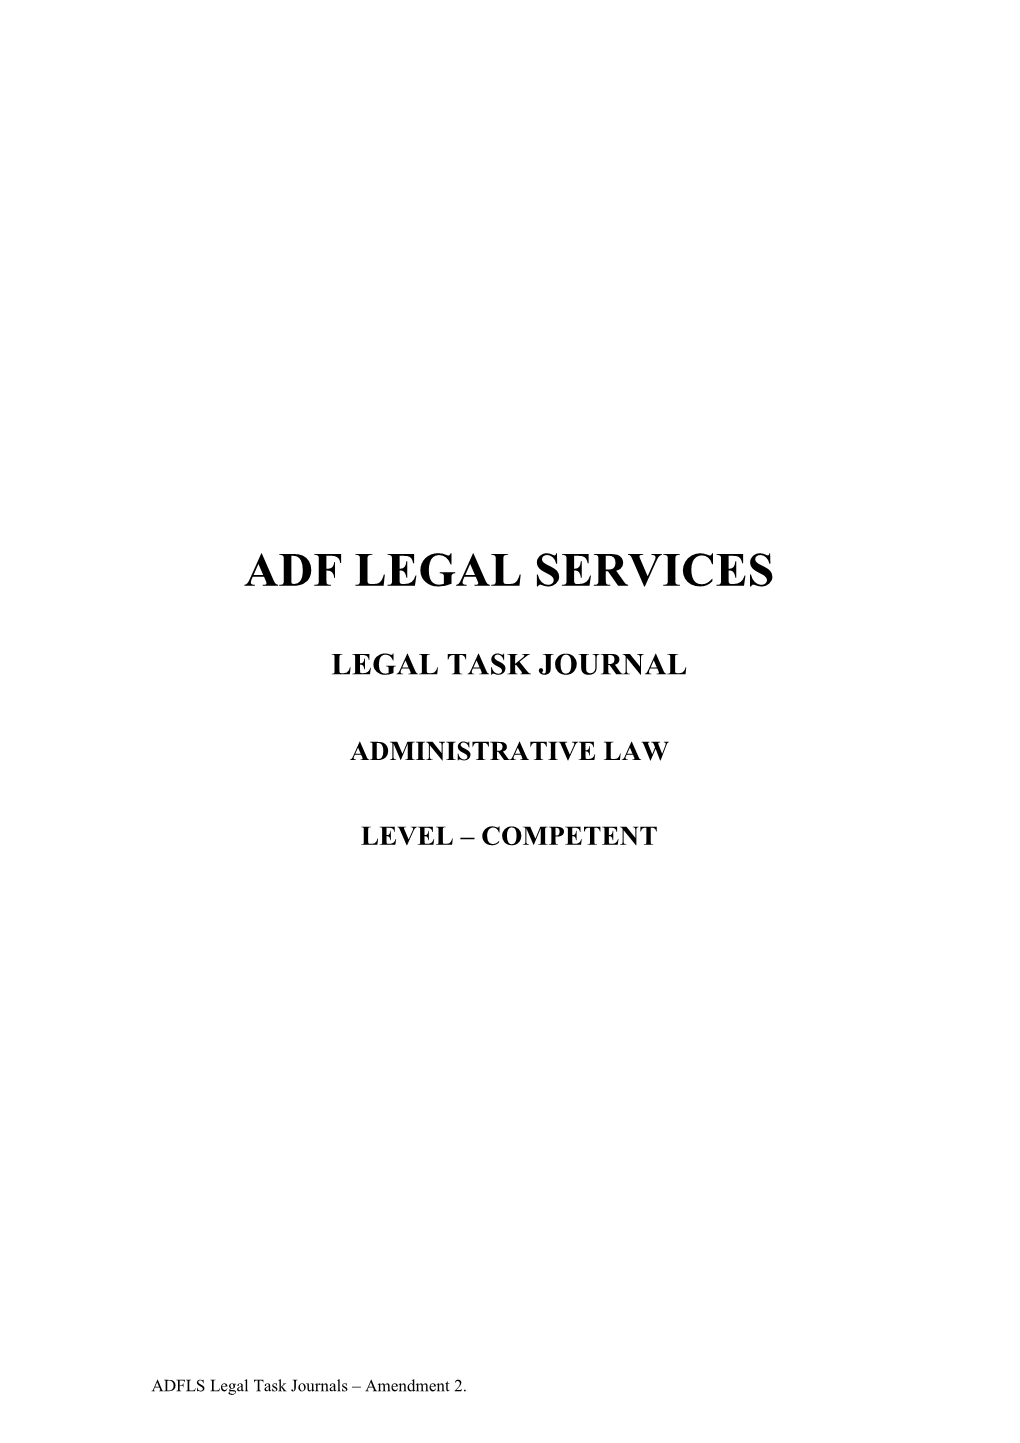 Military Administrative and Civil Law Tasks